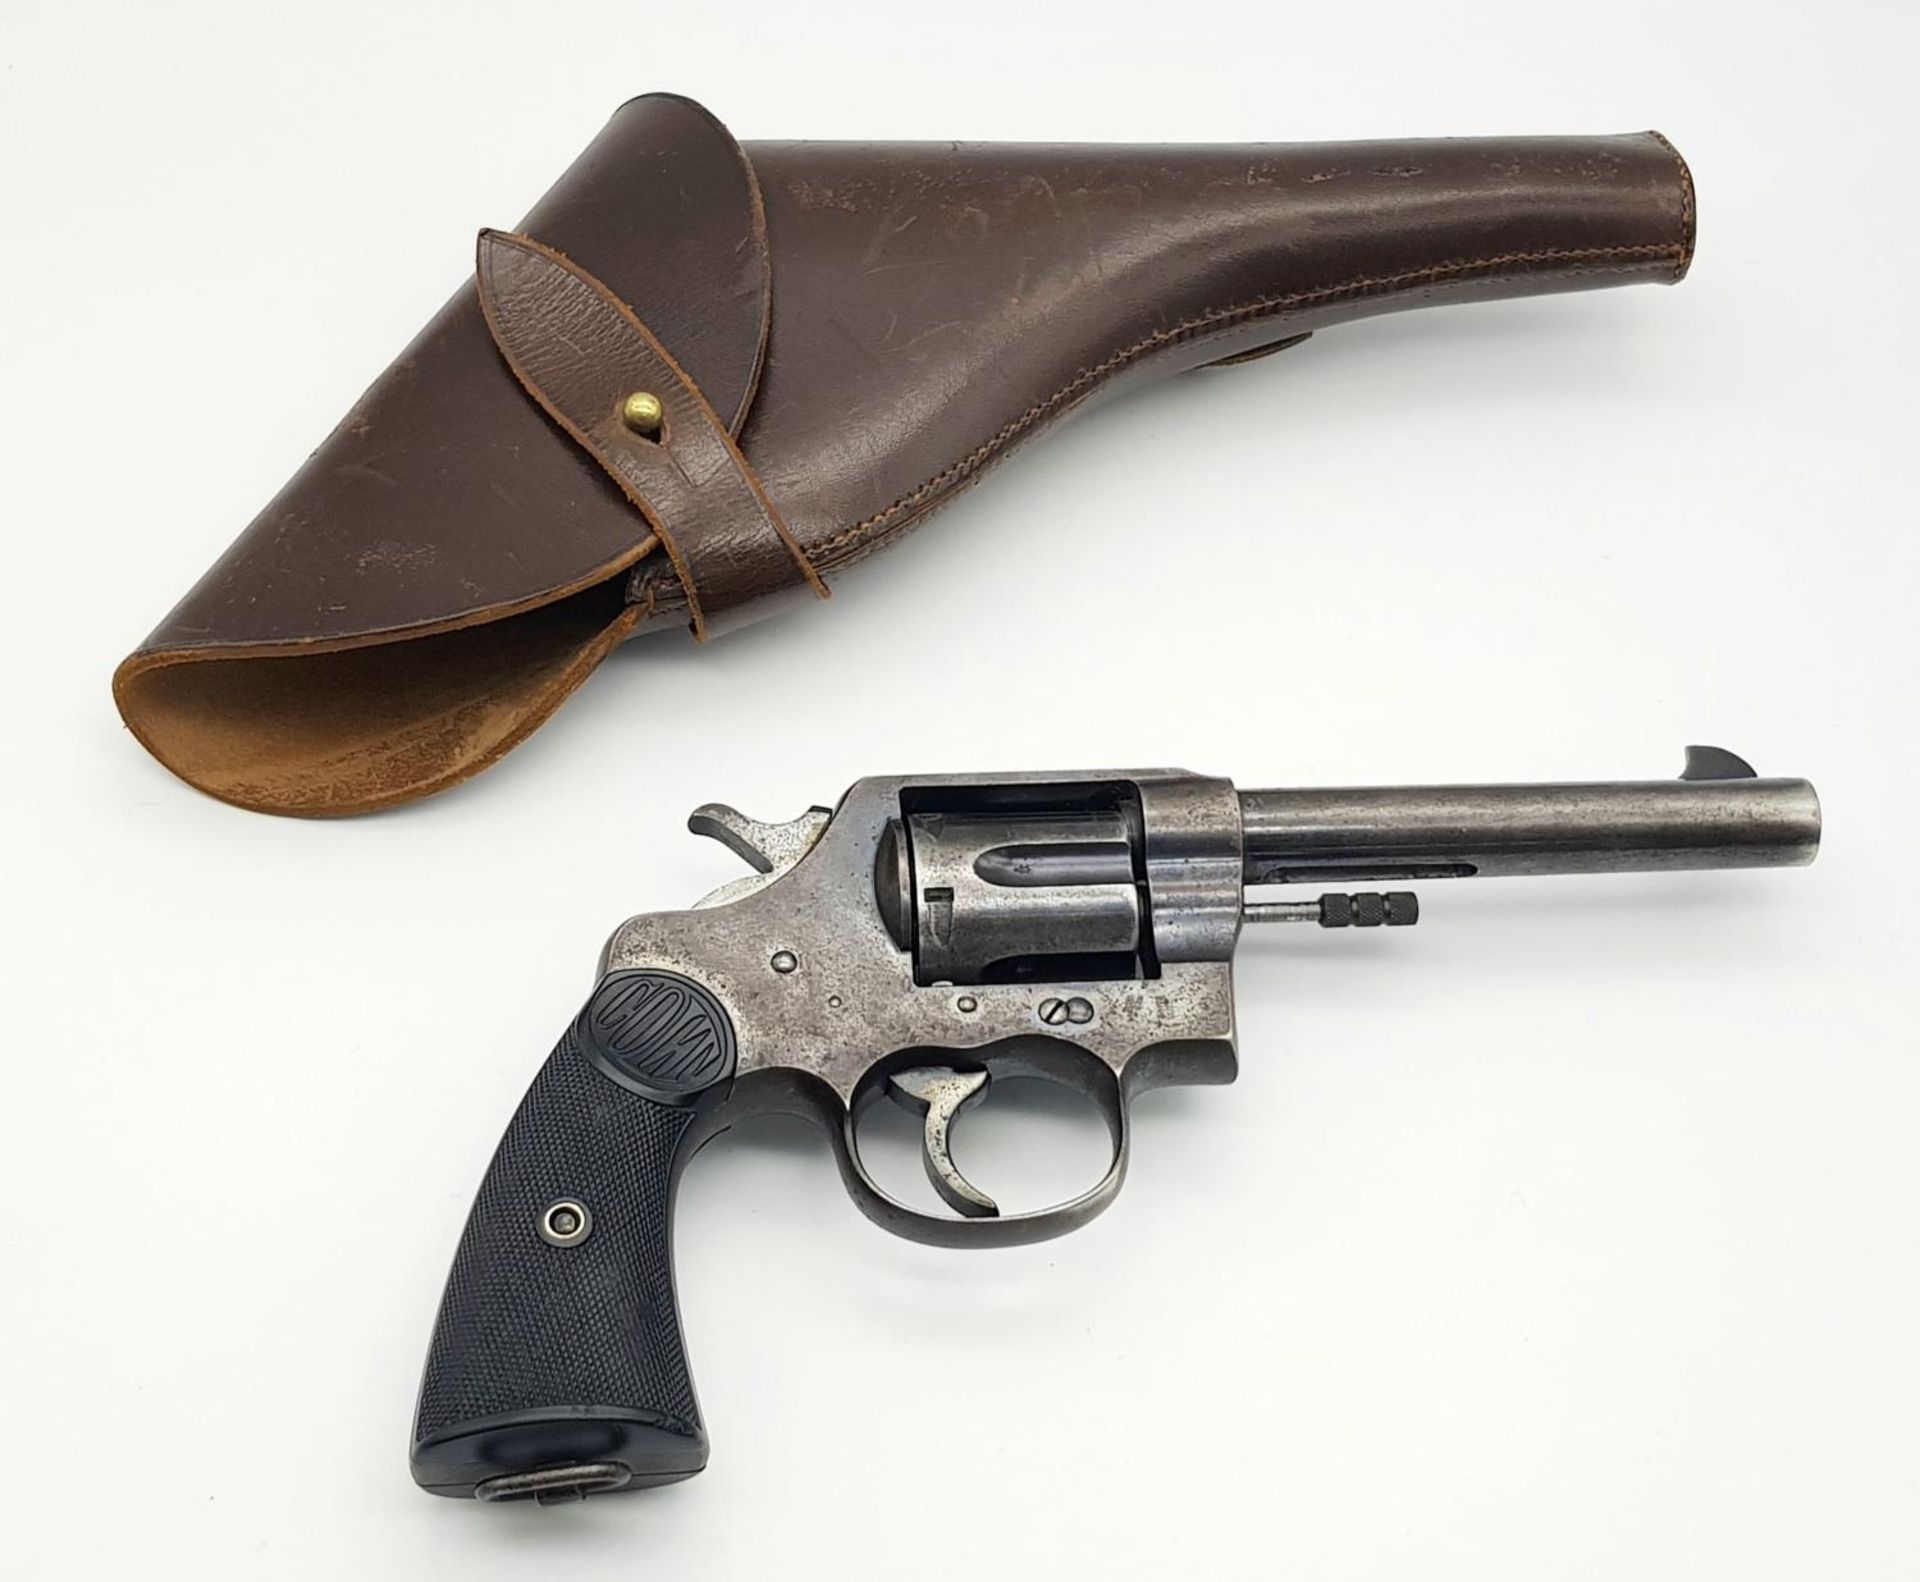 A Rare WW1 Deactivated Colt Revolver with Leather Holster. These British contract Colt revolvers